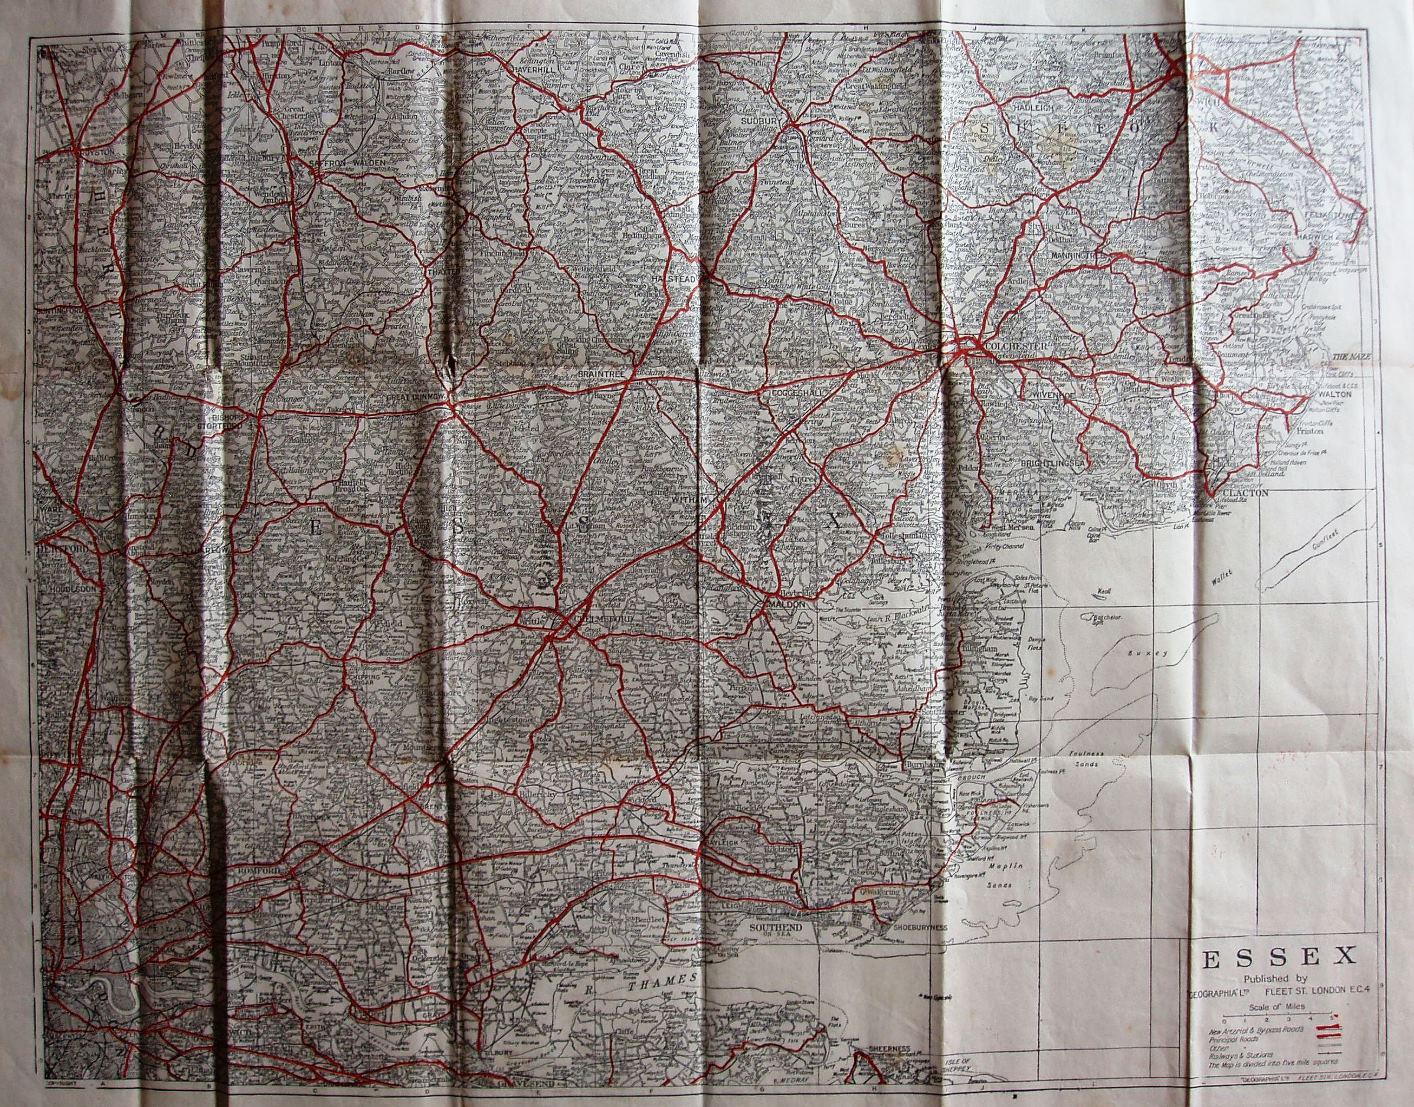 Geographia Up to Date Road Map of Essex, 1942